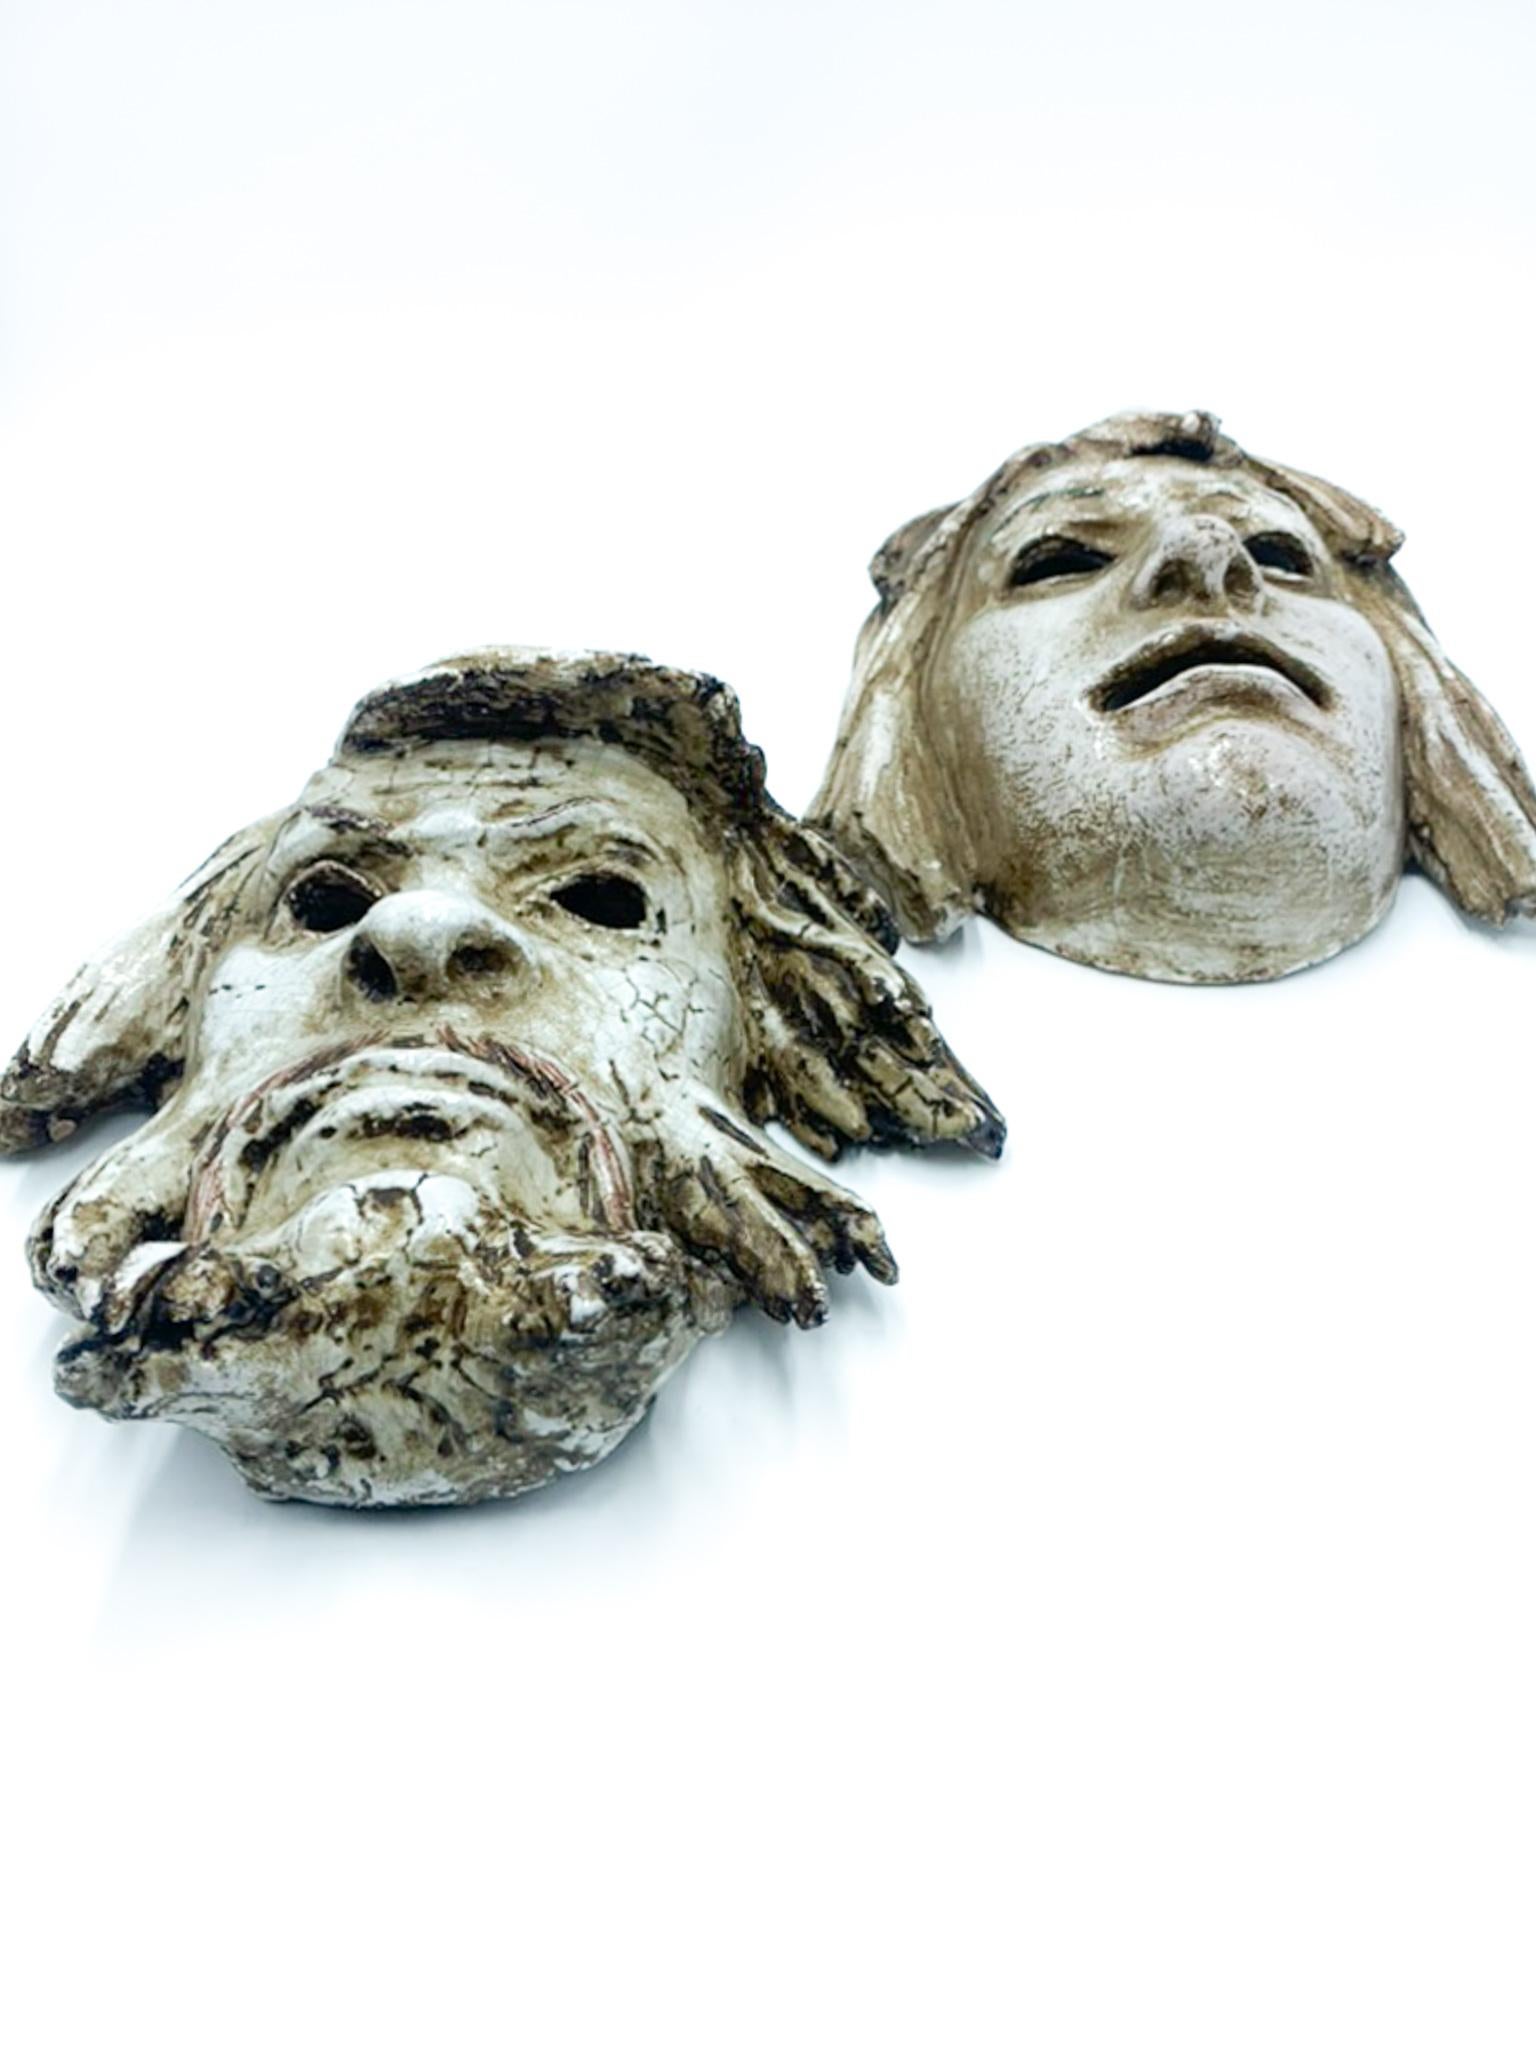 Italian Pair of Masks Sculpted in Terracotta by Roberto Rigon, 1960s For Sale